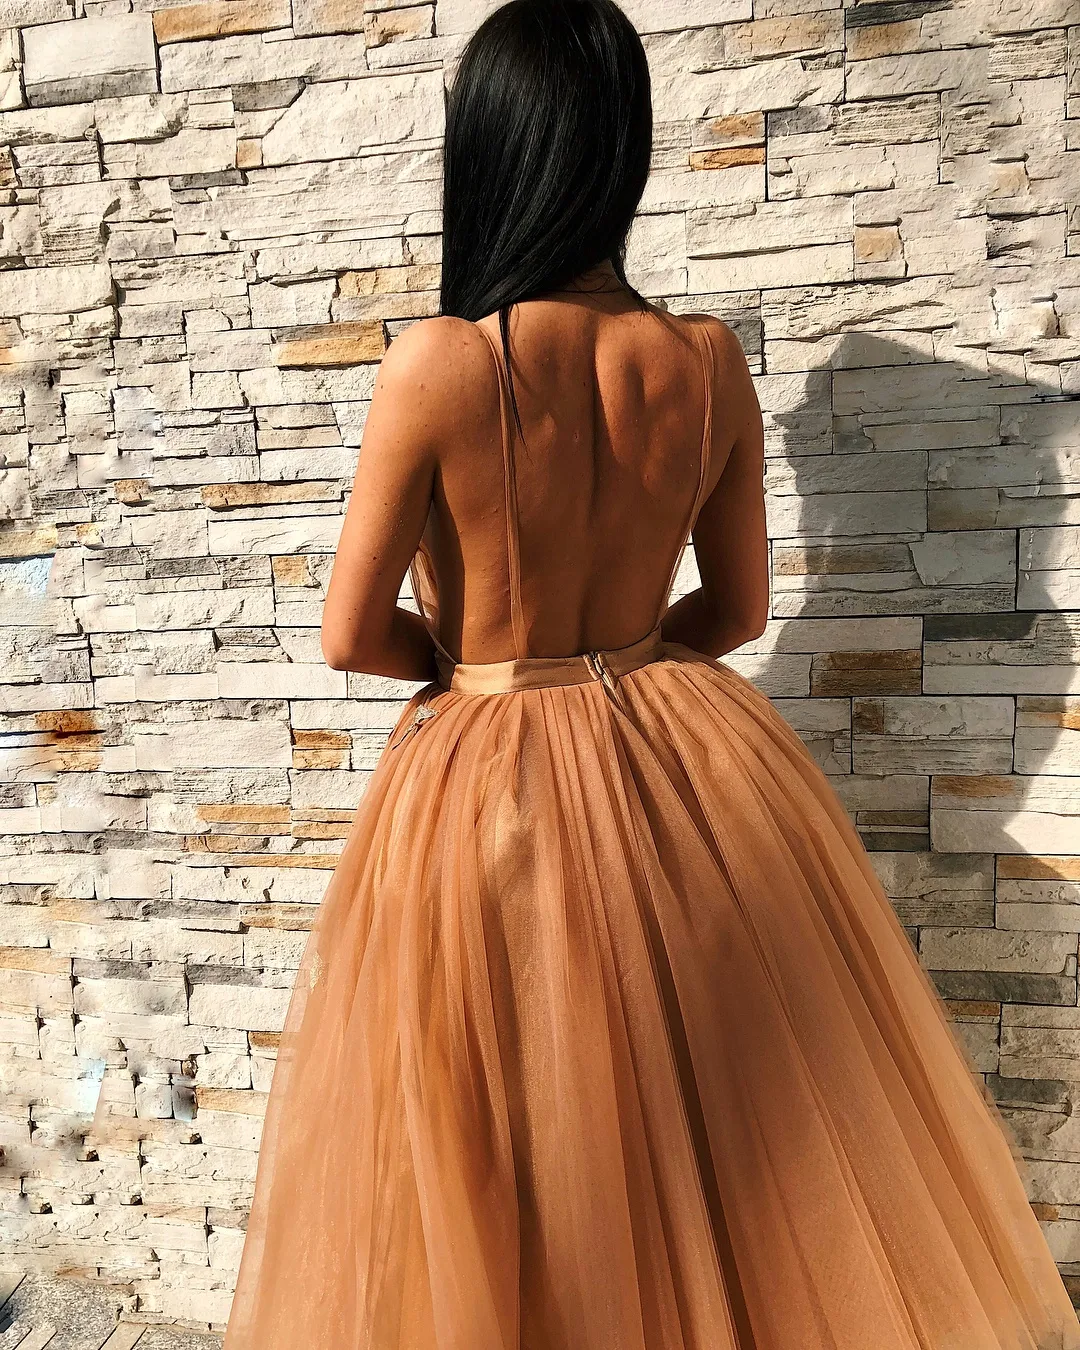 Stylish Backless Appliqued Homecoming Dresses For Juniors V Neck Short Prom Gowns A Line Pleated Knee Length Tulle Tail Party Dress 415